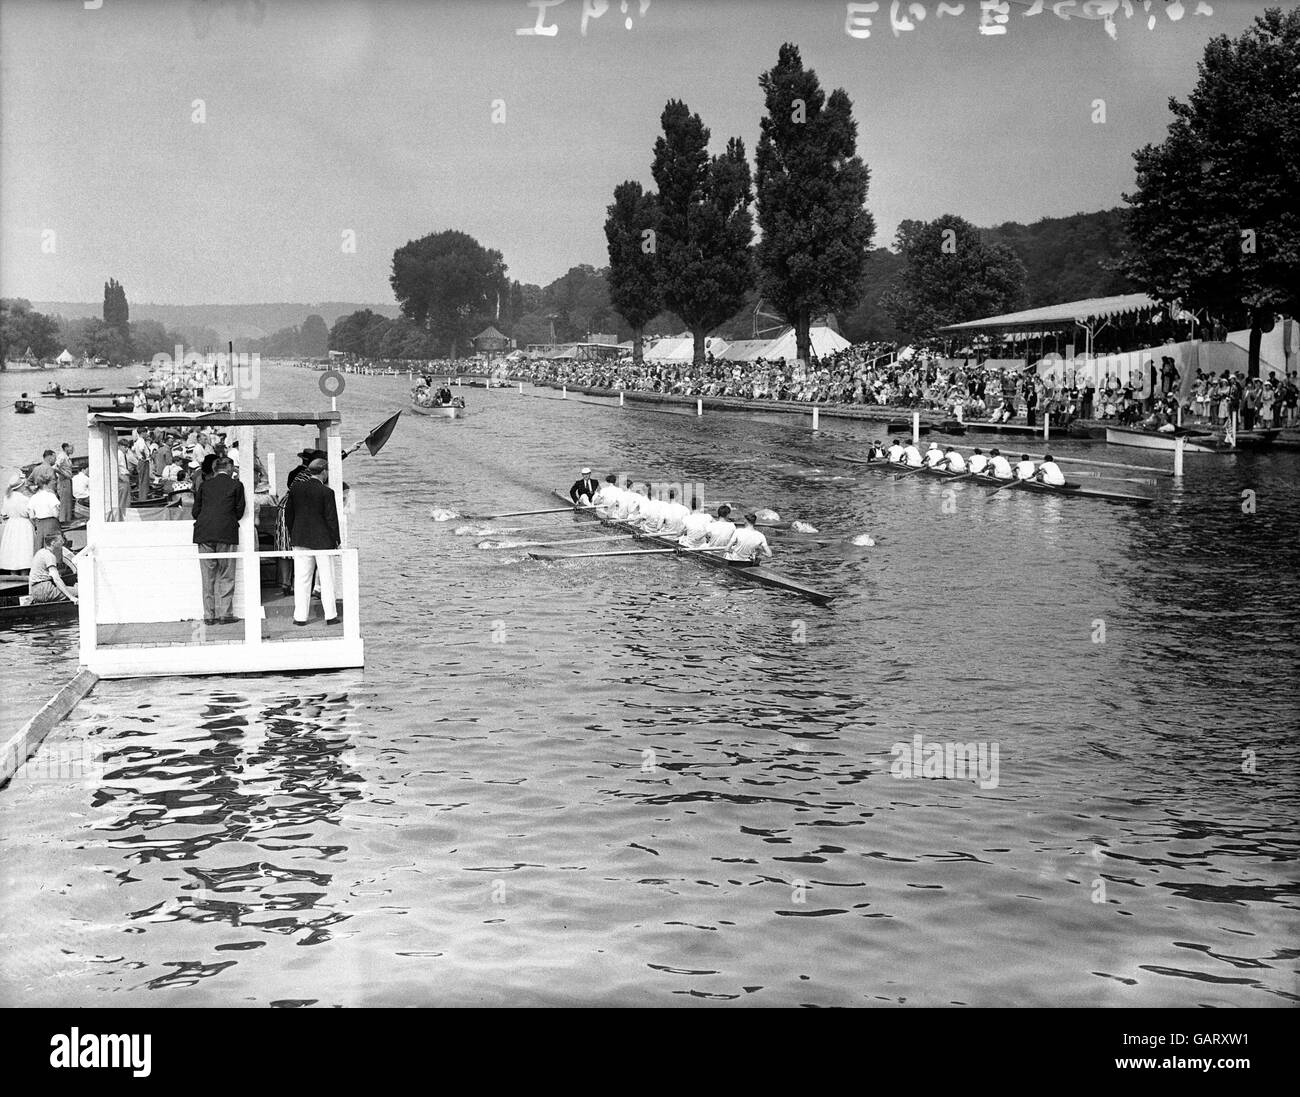 Rowing - Henley Royal Regatta. The Ibis boat beats the Eton Excelsior boat in heat 13 of the Thames Cup for coxed eights Stock Photo